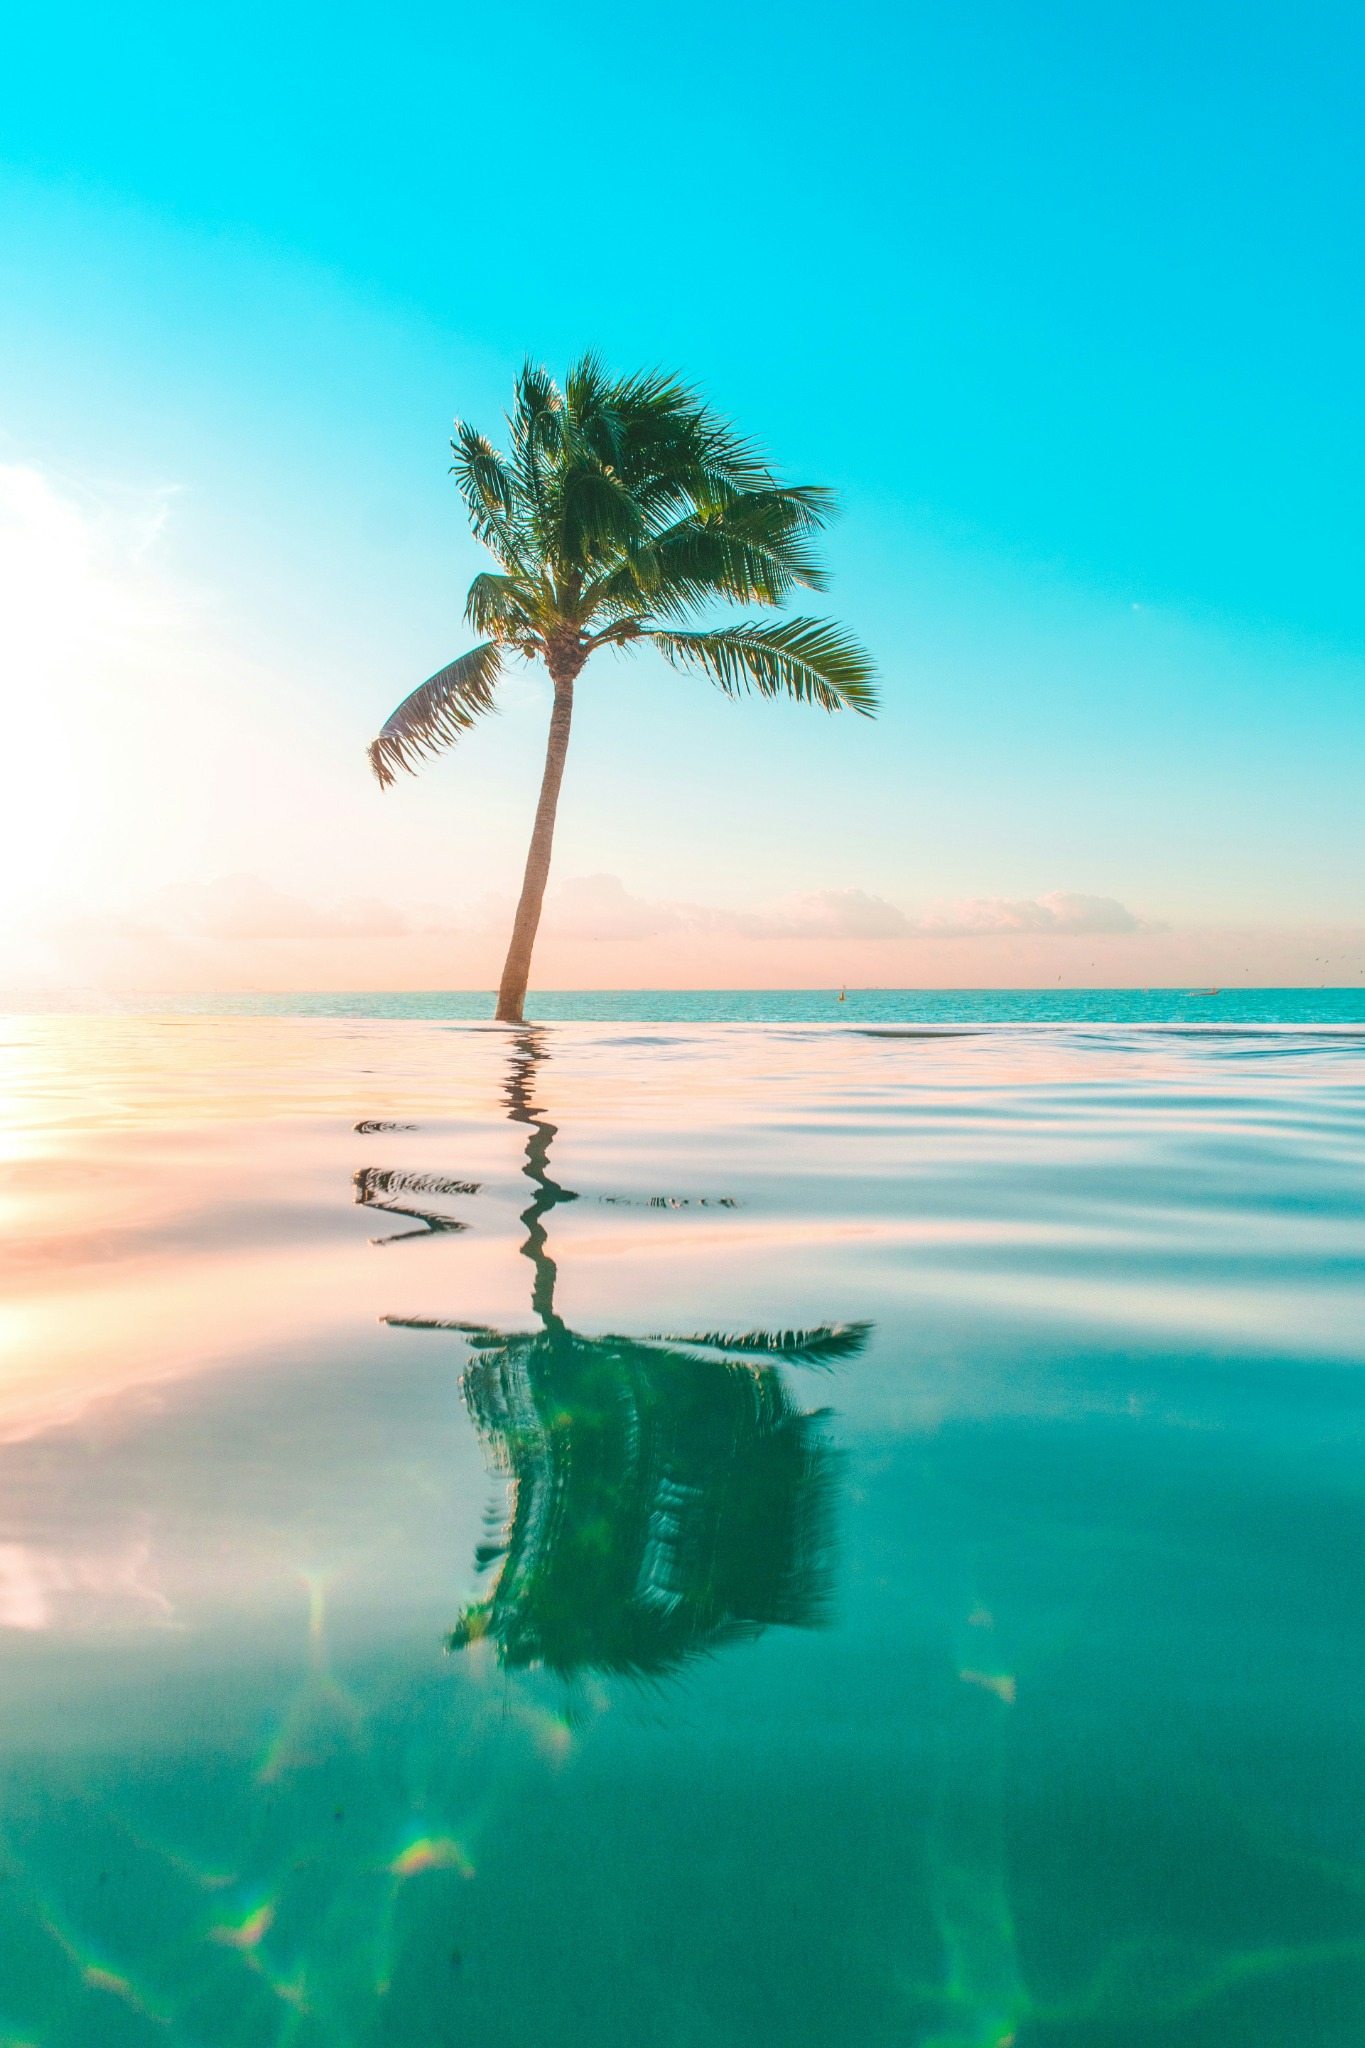 Solitary palm tree reflection